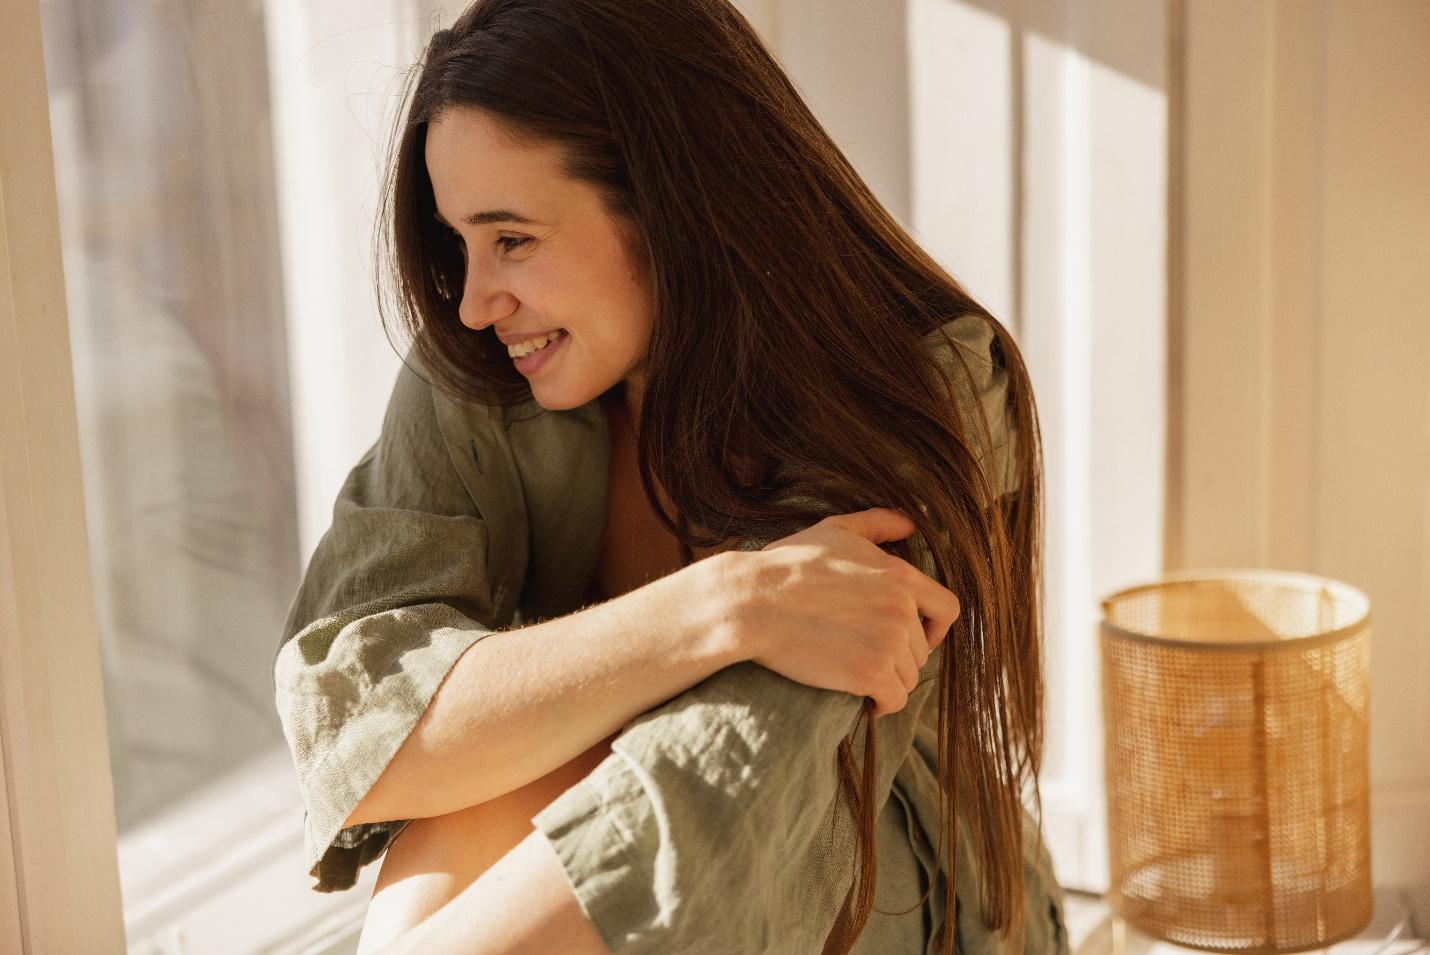 C:\Users\DELL\Downloads\happy-young-caucasian-girl-with-smile-face-looks-out-window-while-sitting-windowsill-morning-brunette-with-long-hair-wears-green-loose-shirt-concept-rest-recovery.jpg